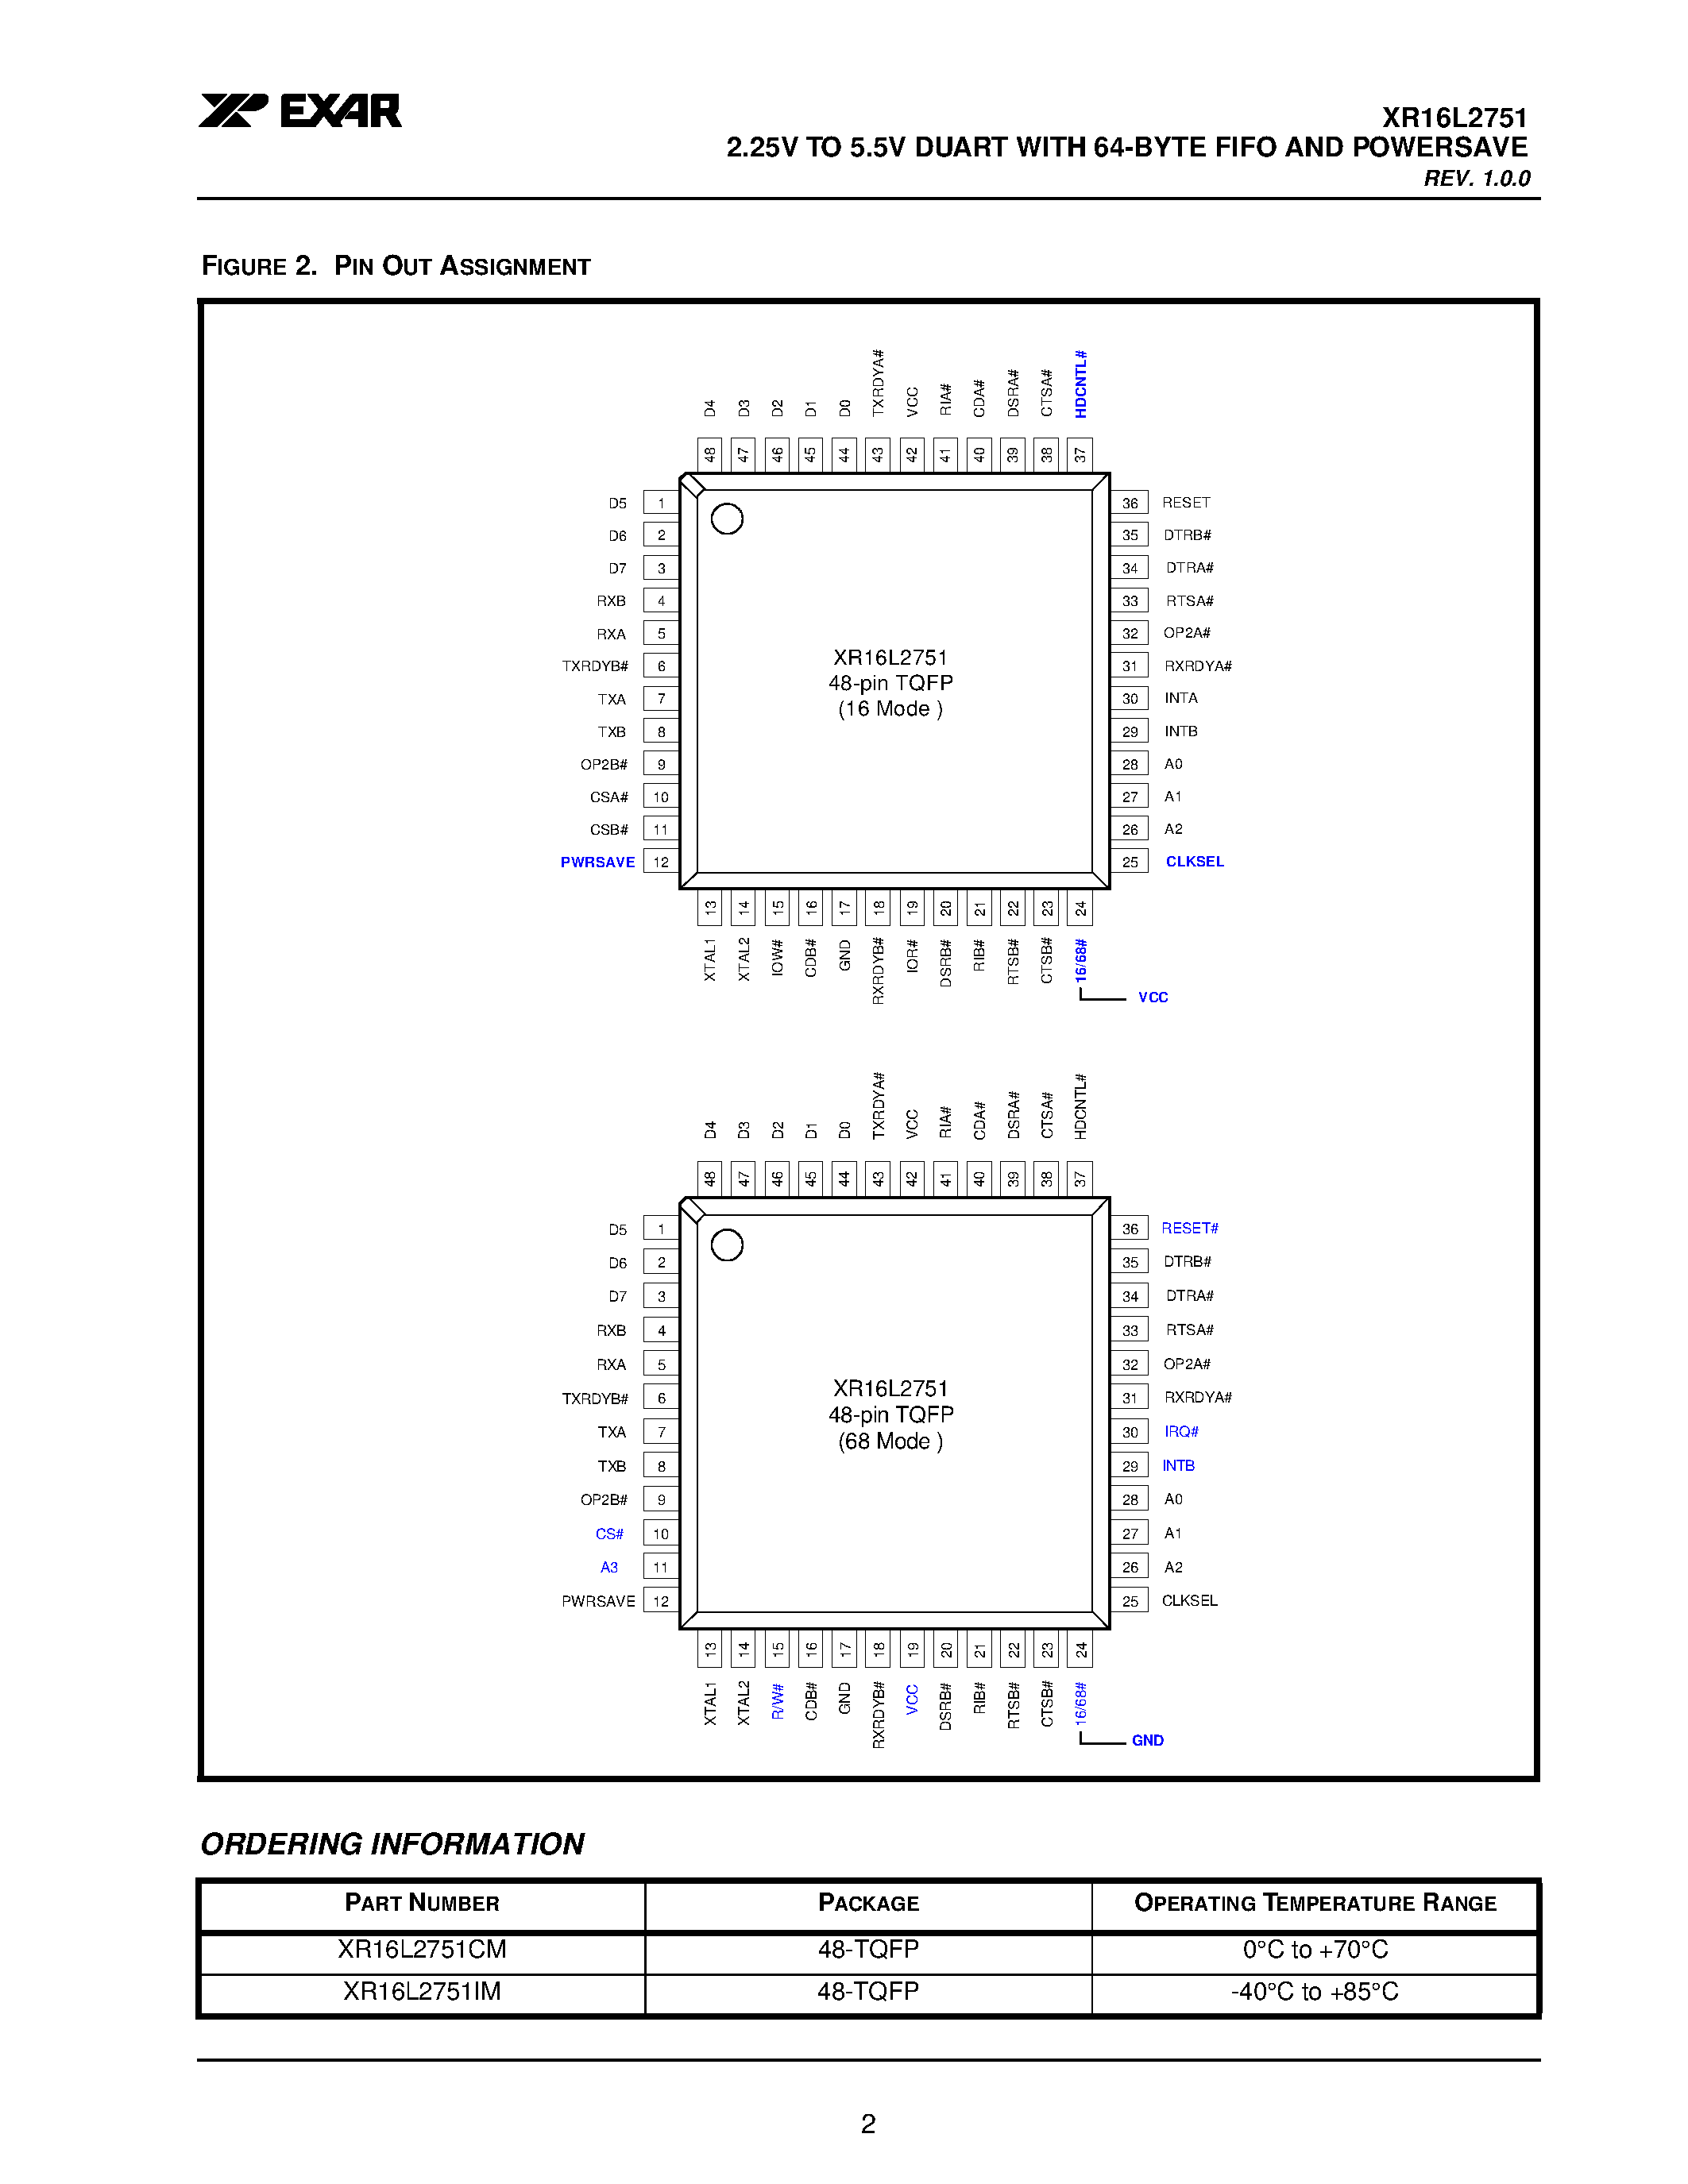 Datasheet XR16L2751CM - 2.25V TO 5.5V DUART WITH 64-BYTE FIFO AND POWERSAVE page 2